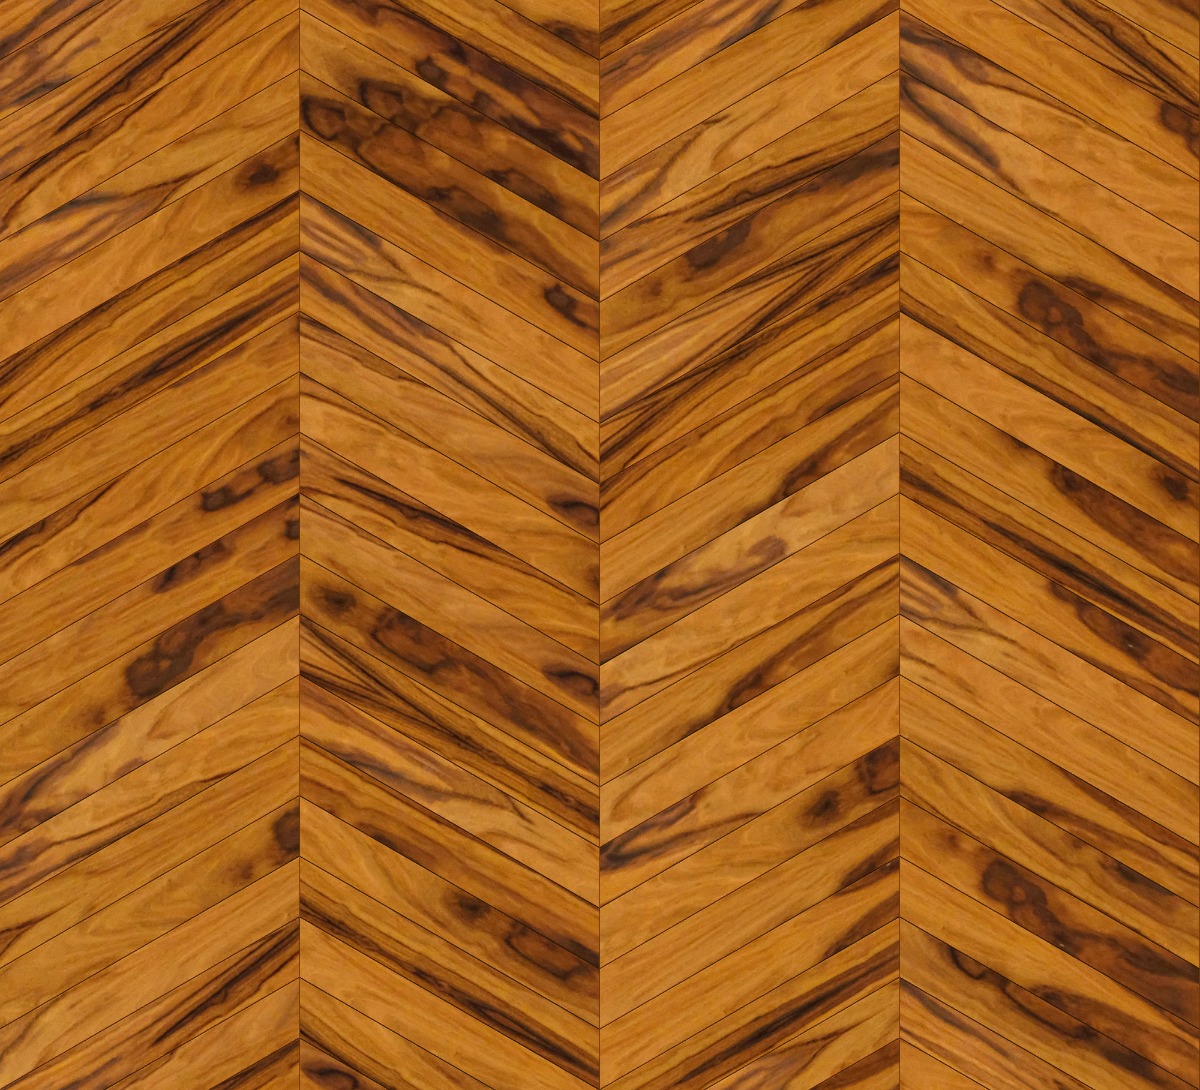 A seamless wood texture with wood veneer boards arranged in a Chevron pattern